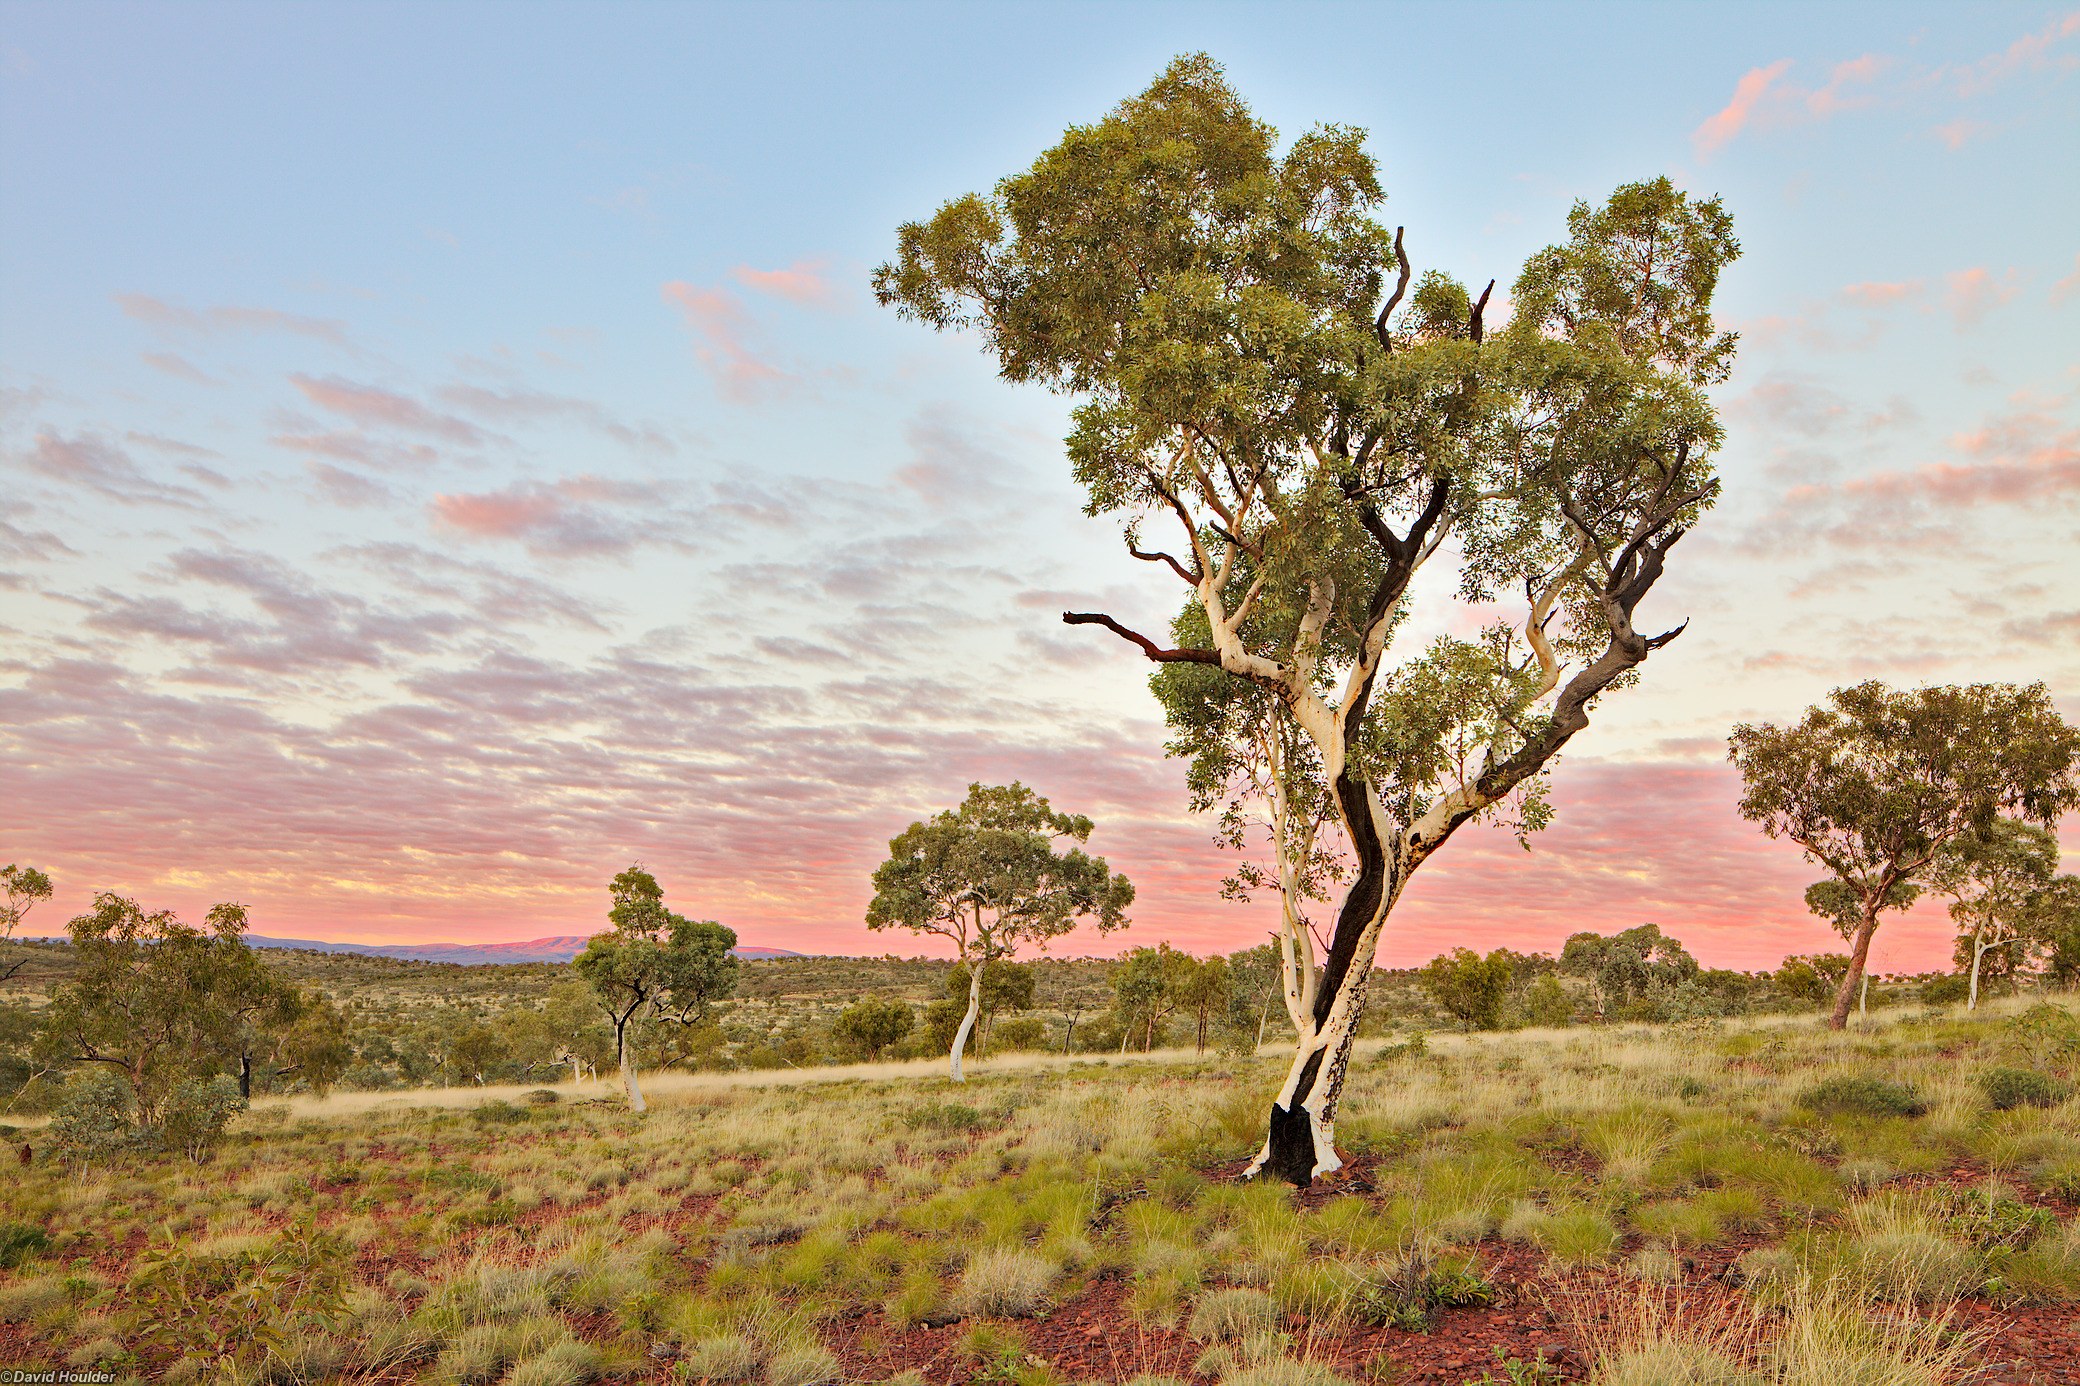 A fire-scarred eucalyptus tree on a gently sloping hillside at dawn